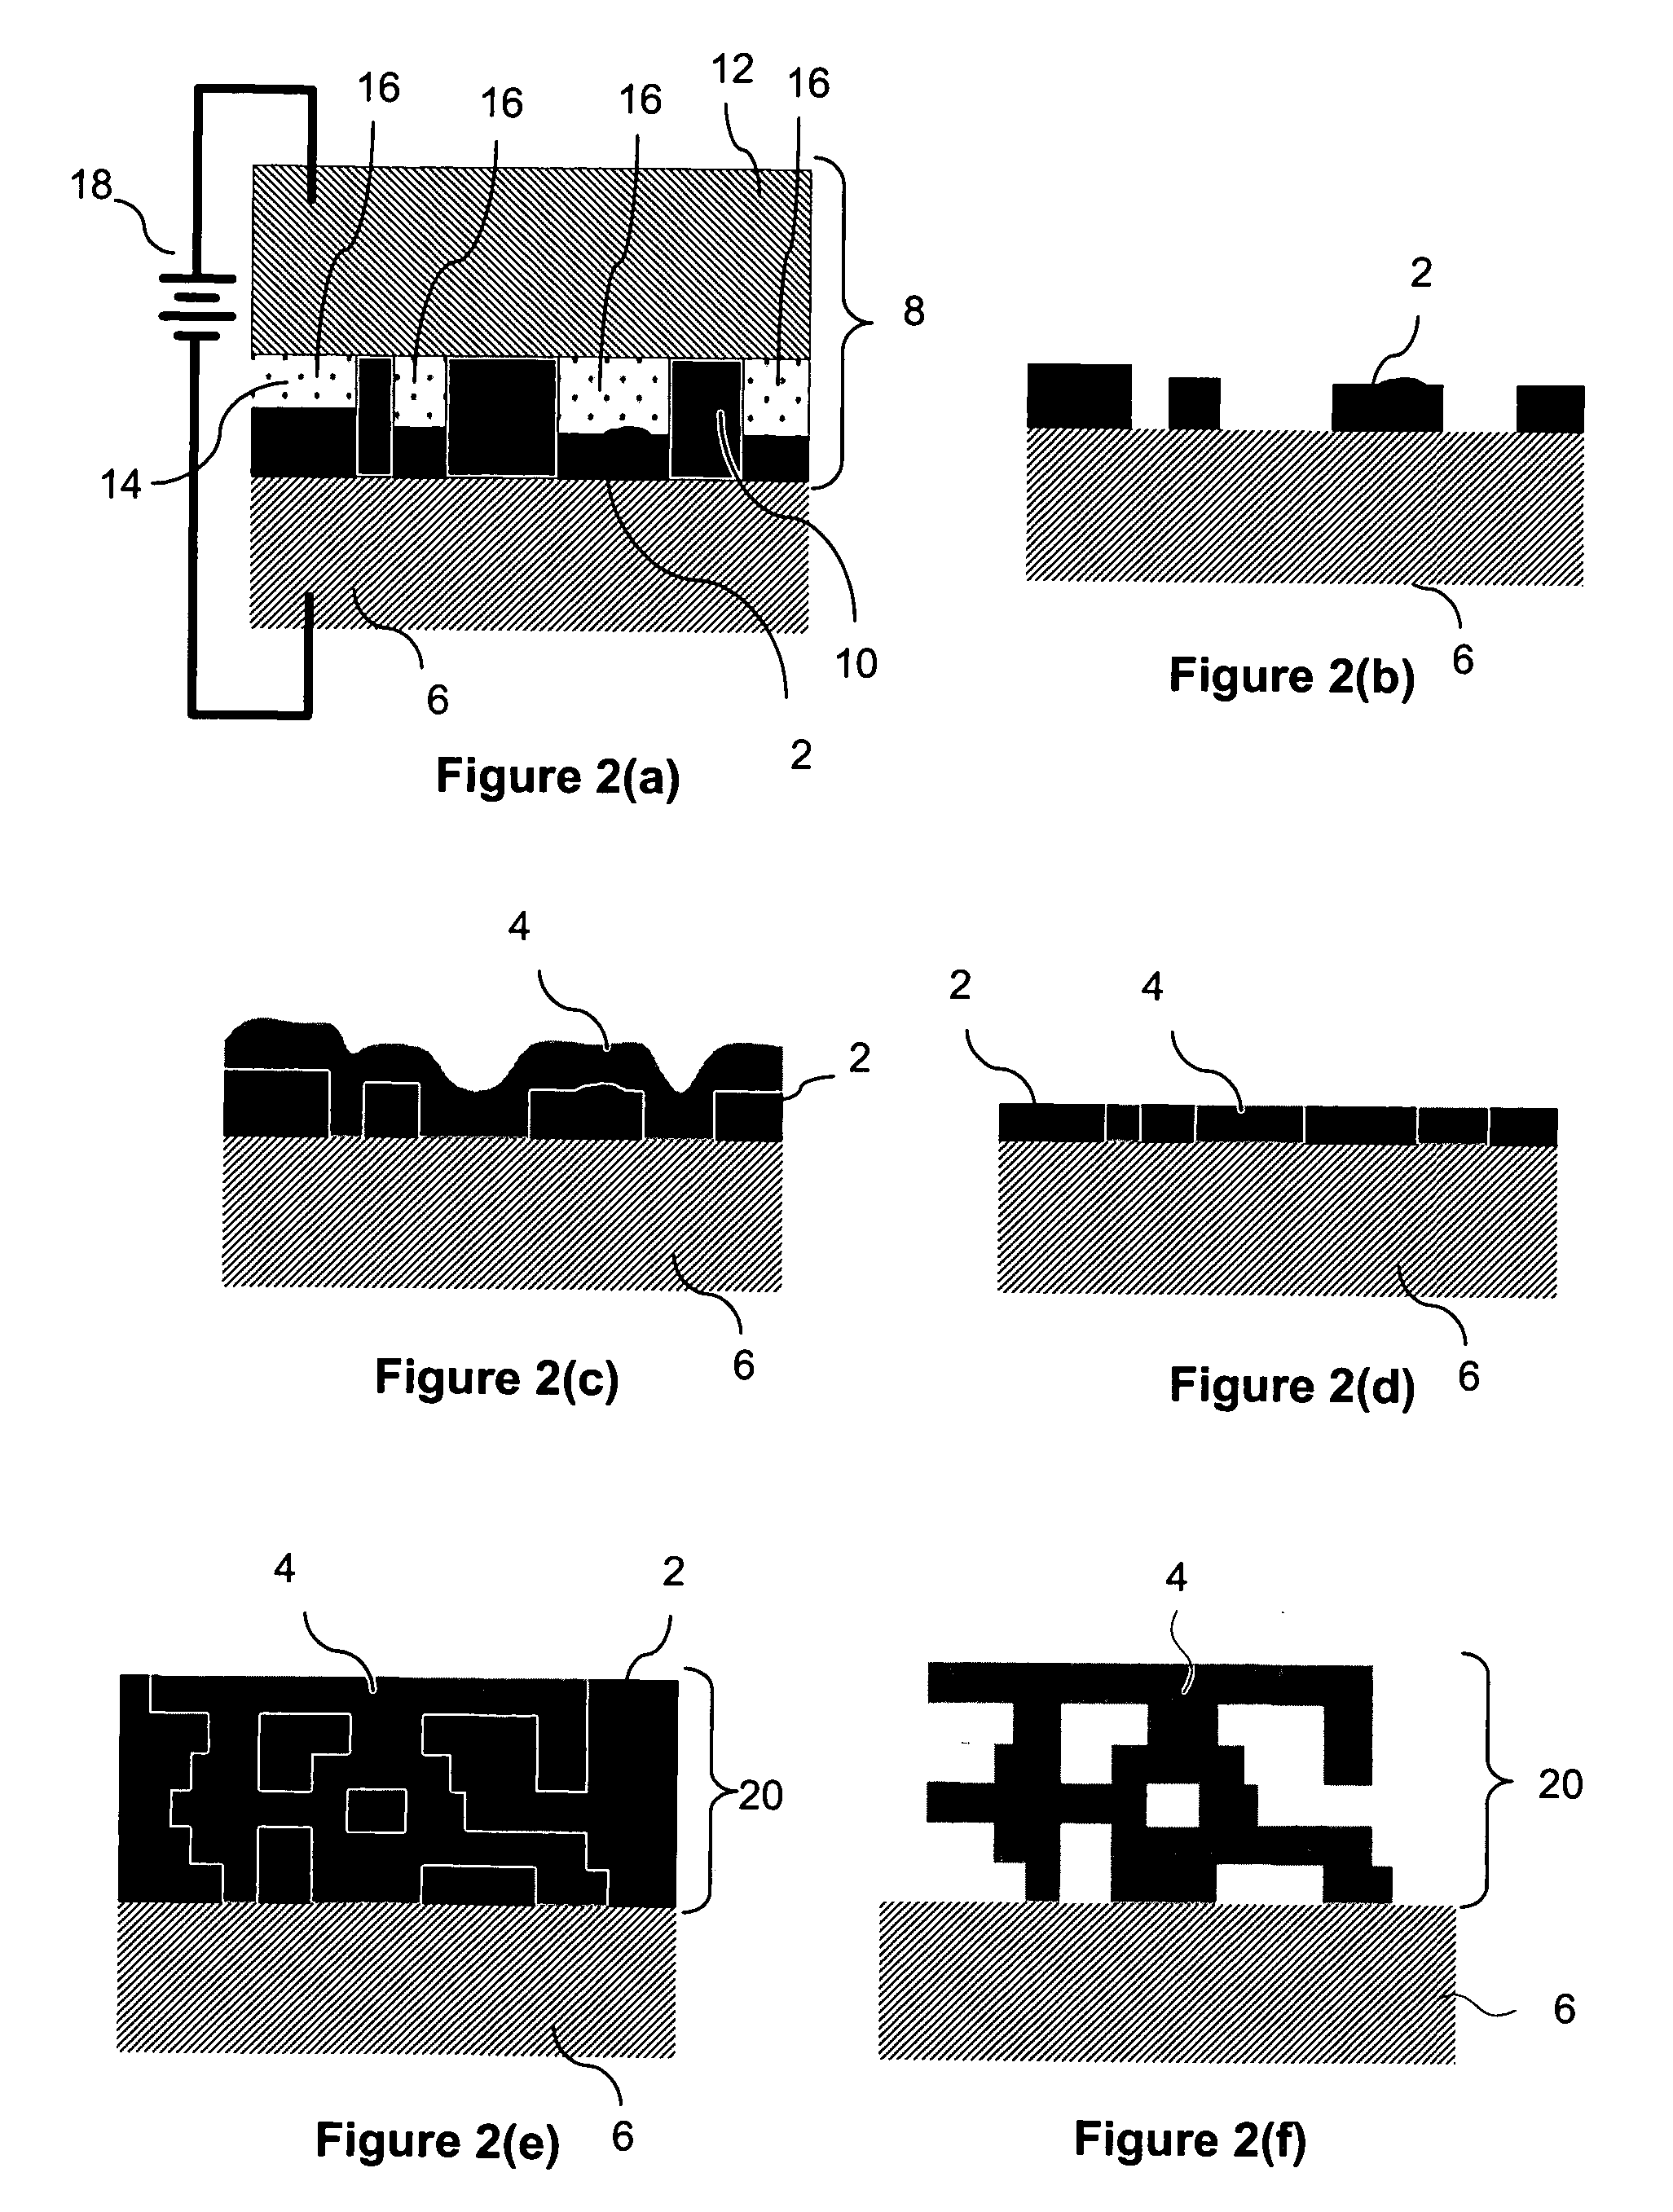 Method of electrochemically fabricating multilayer structures having improved interlayer adhesion